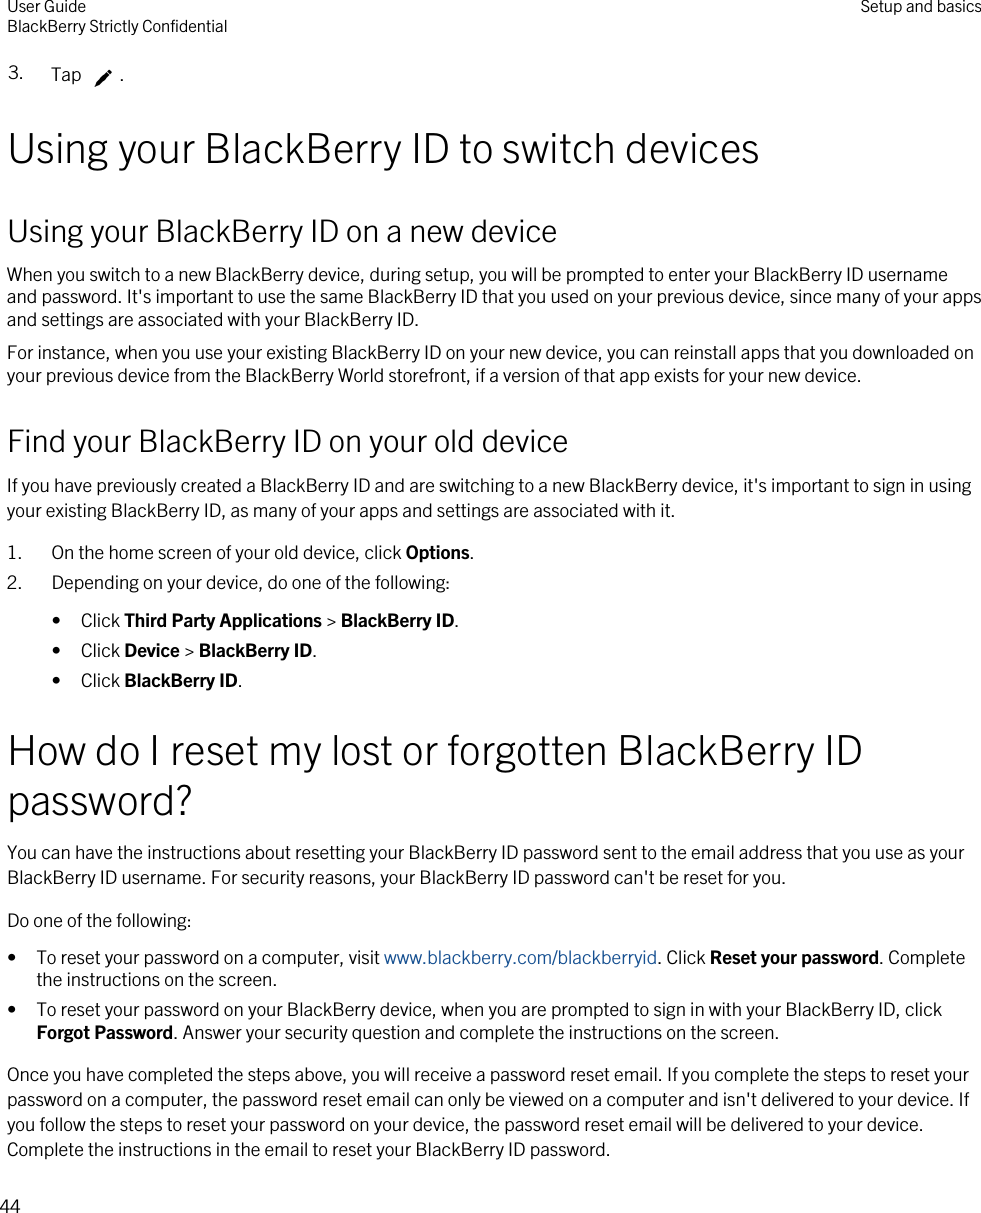 3. Tap  .Using your BlackBerry ID to switch devicesUsing your BlackBerry ID on a new deviceWhen you switch to a new BlackBerry device, during setup, you will be prompted to enter your BlackBerry ID username and password. It&apos;s important to use the same BlackBerry ID that you used on your previous device, since many of your apps and settings are associated with your BlackBerry ID.For instance, when you use your existing BlackBerry ID on your new device, you can reinstall apps that you downloaded on your previous device from the BlackBerry World storefront, if a version of that app exists for your new device.Find your BlackBerry ID on your old deviceIf you have previously created a BlackBerry ID and are switching to a new BlackBerry device, it&apos;s important to sign in using your existing BlackBerry ID, as many of your apps and settings are associated with it.1. On the home screen of your old device, click Options.2. Depending on your device, do one of the following:• Click Third Party Applications &gt; BlackBerry ID.• Click Device &gt; BlackBerry ID.• Click BlackBerry ID.How do I reset my lost or forgotten BlackBerry ID password?You can have the instructions about resetting your BlackBerry ID password sent to the email address that you use as your BlackBerry ID username. For security reasons, your BlackBerry ID password can&apos;t be reset for you.Do one of the following:• To reset your password on a computer, visit www.blackberry.com/blackberryid. Click Reset your password. Complete the instructions on the screen.• To reset your password on your BlackBerry device, when you are prompted to sign in with your BlackBerry ID, click Forgot Password. Answer your security question and complete the instructions on the screen.Once you have completed the steps above, you will receive a password reset email. If you complete the steps to reset your password on a computer, the password reset email can only be viewed on a computer and isn&apos;t delivered to your device. If you follow the steps to reset your password on your device, the password reset email will be delivered to your device. Complete the instructions in the email to reset your BlackBerry ID password.User GuideBlackBerry Strictly Confidential Setup and basics44